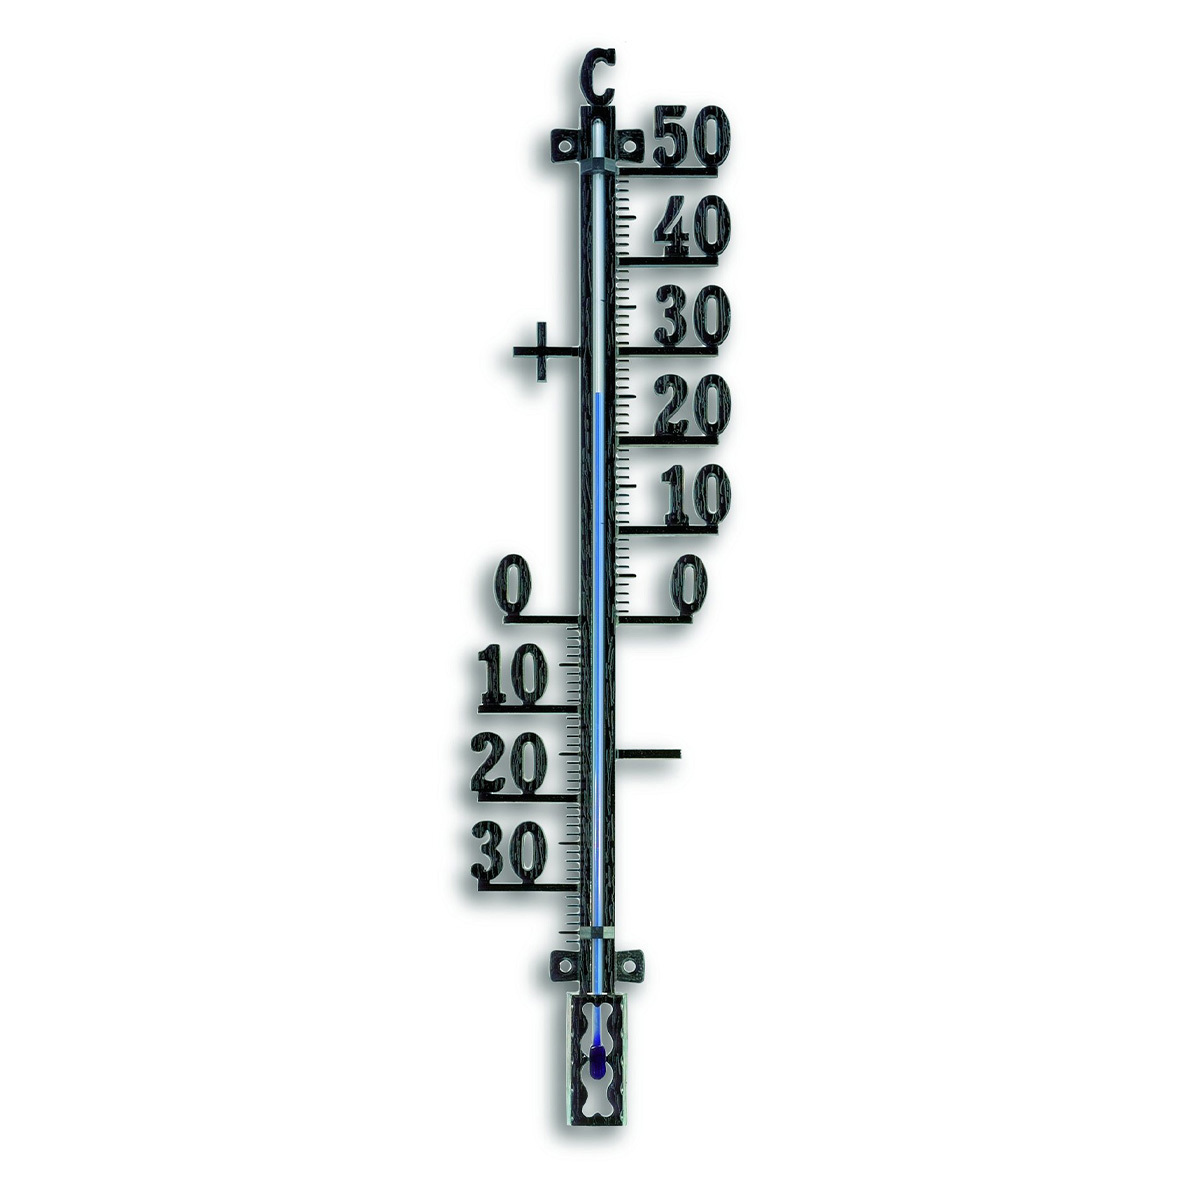 12-5002-01-analoges-aussenthermometer-metall-1200x1200px.jpg